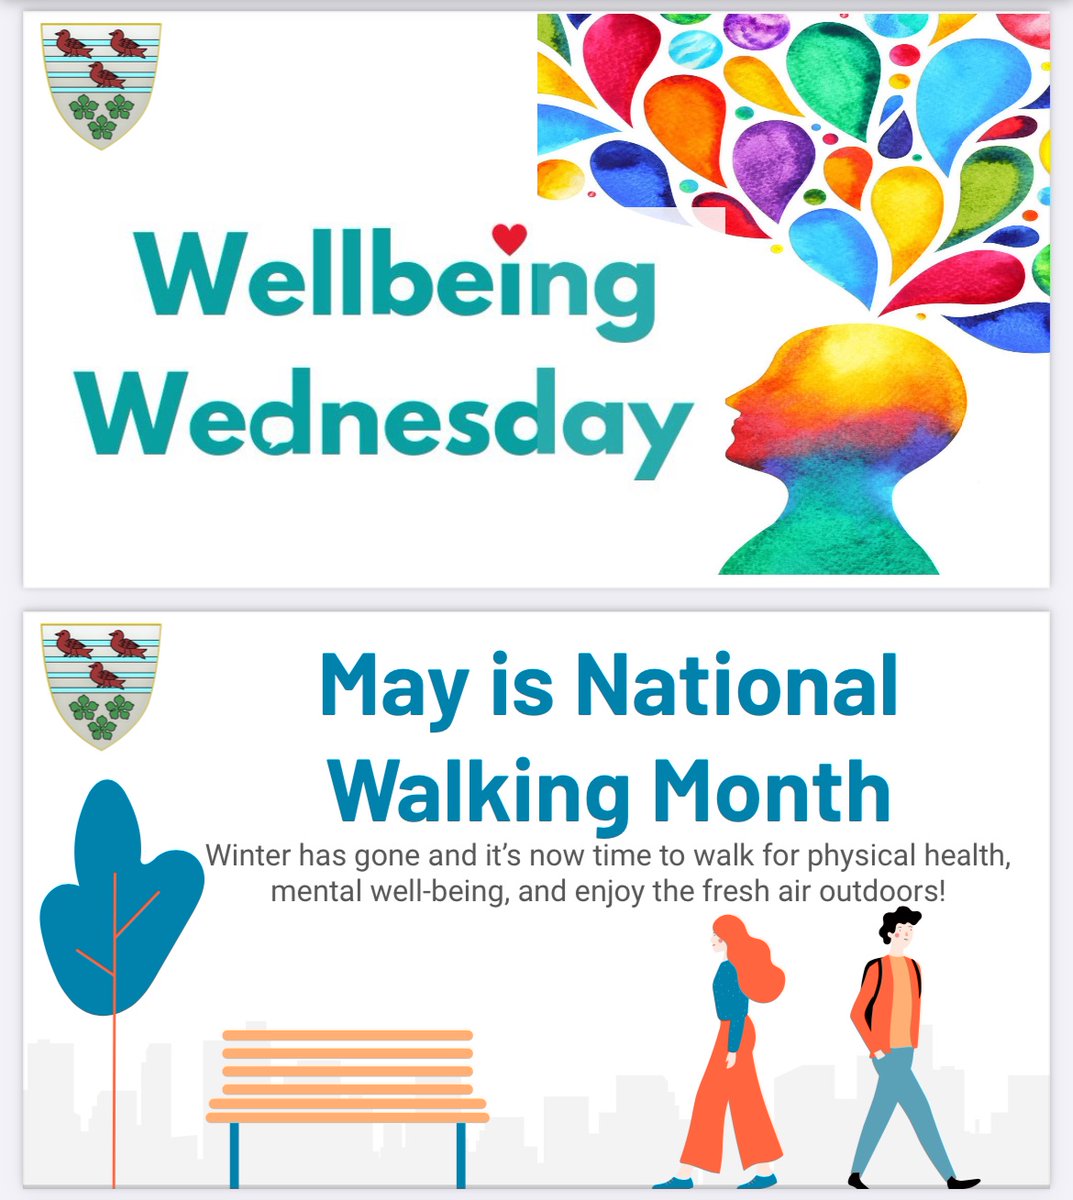 This weeks Wellbeing Wednesday @YsgolGreenhill is celebrating ‘May is National Walking Month’ understanding the benefits of walking, how to make it more fun and taking on a walking challenge 🚶🏼☀️🚶🏻‍♀️🌺🚶🏼‍♂️🌳 #teamgreenhill #bluewave #NationalWalkingMonth #WalkthisMay